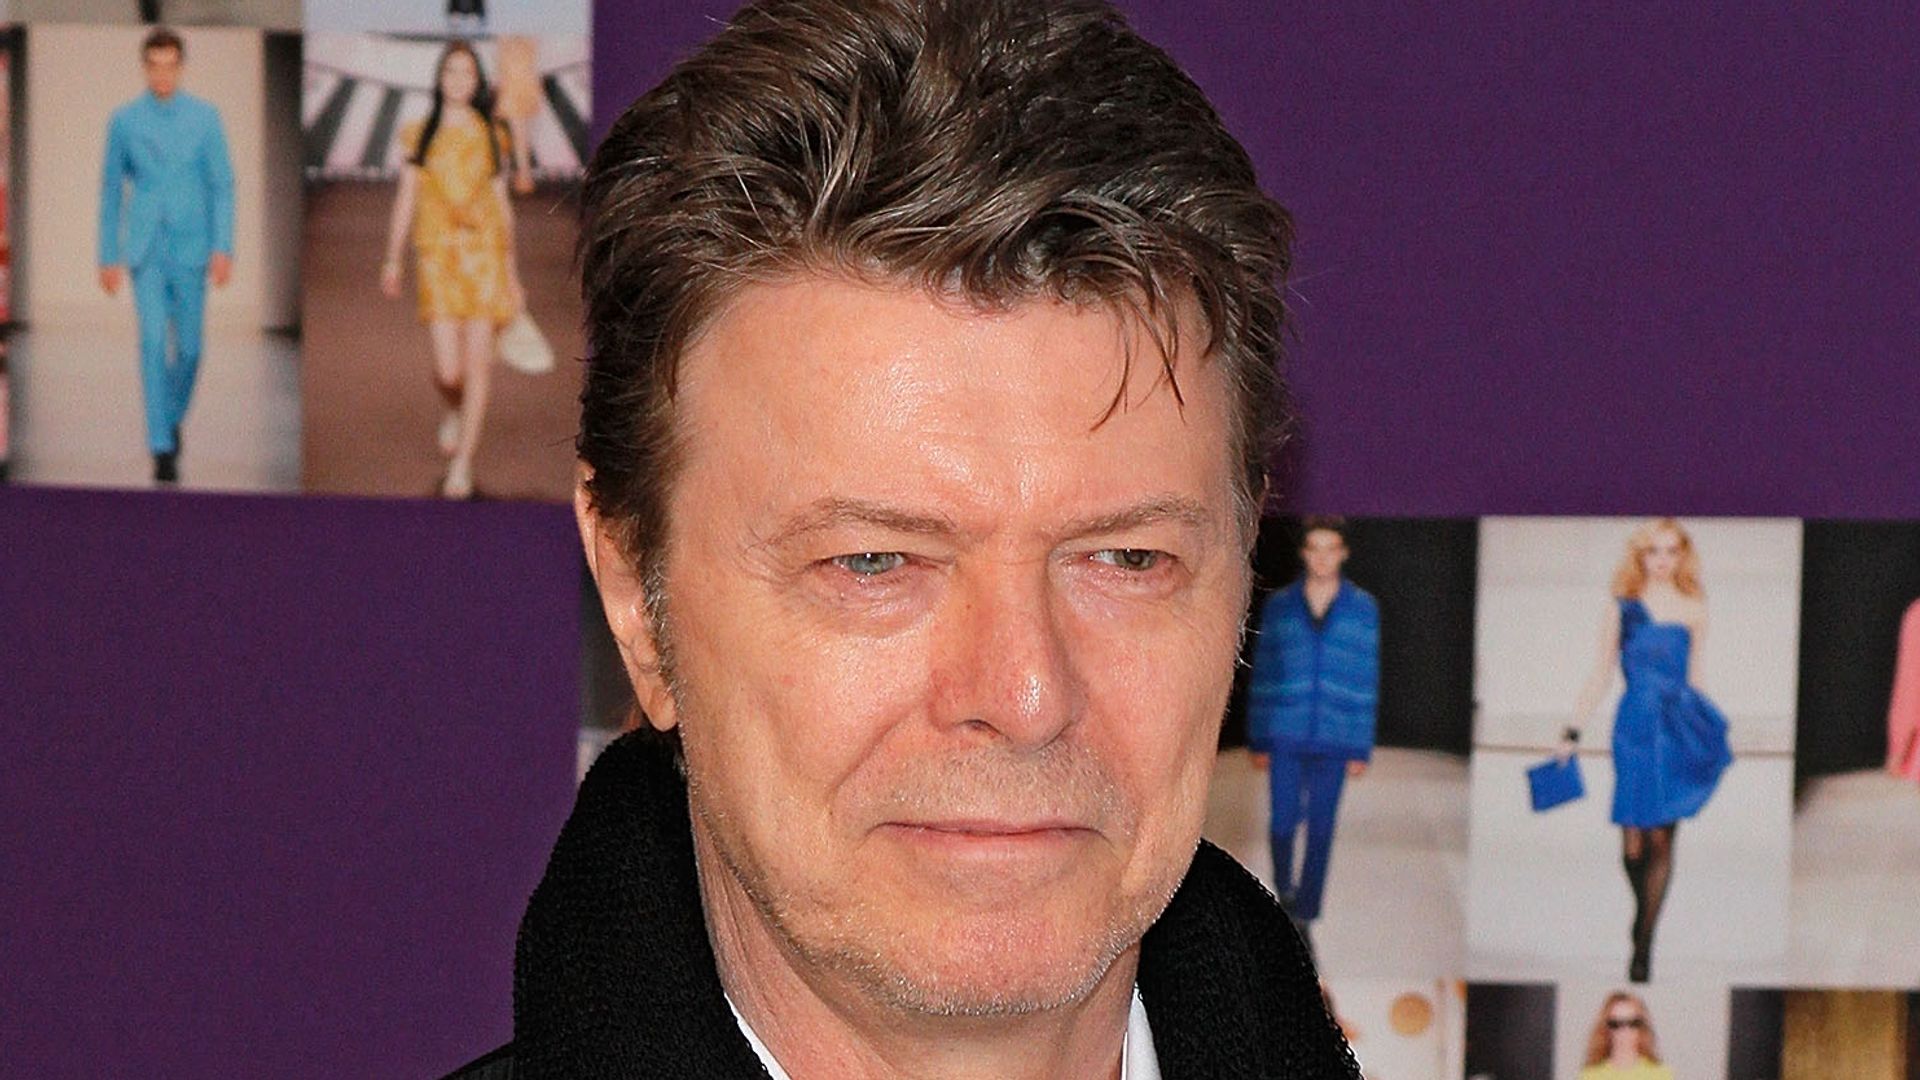 Singer and Musician David Bowie attends the 2010 CFDA Fashion Awards at Alice Tully Hall, Lincoln Center on June 7, 2010 in New York City